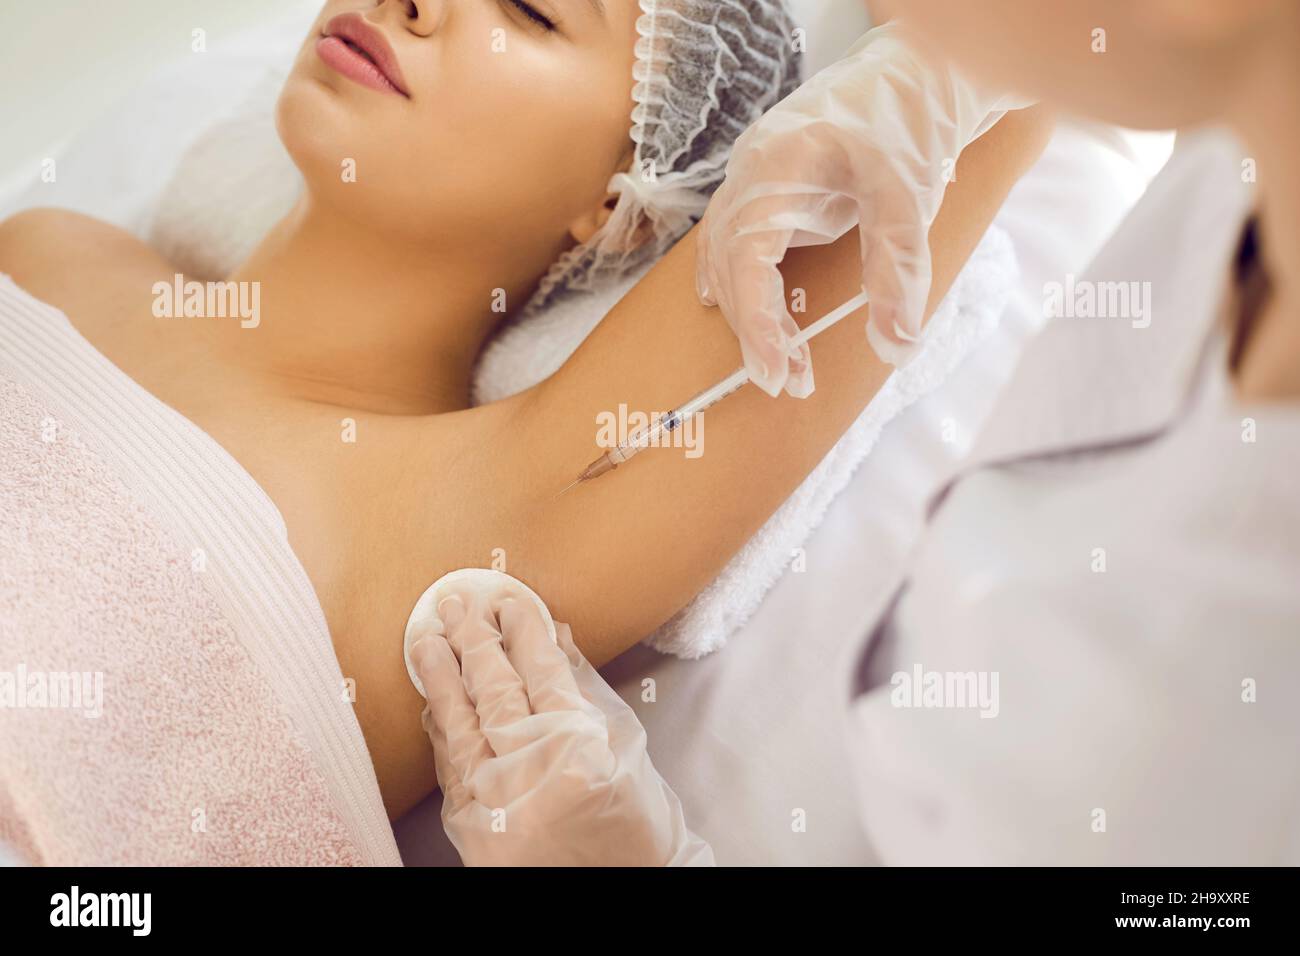 Doctor injecting botox in underarm area to treat hyperhidrosis and reduce body odor Stock Photo